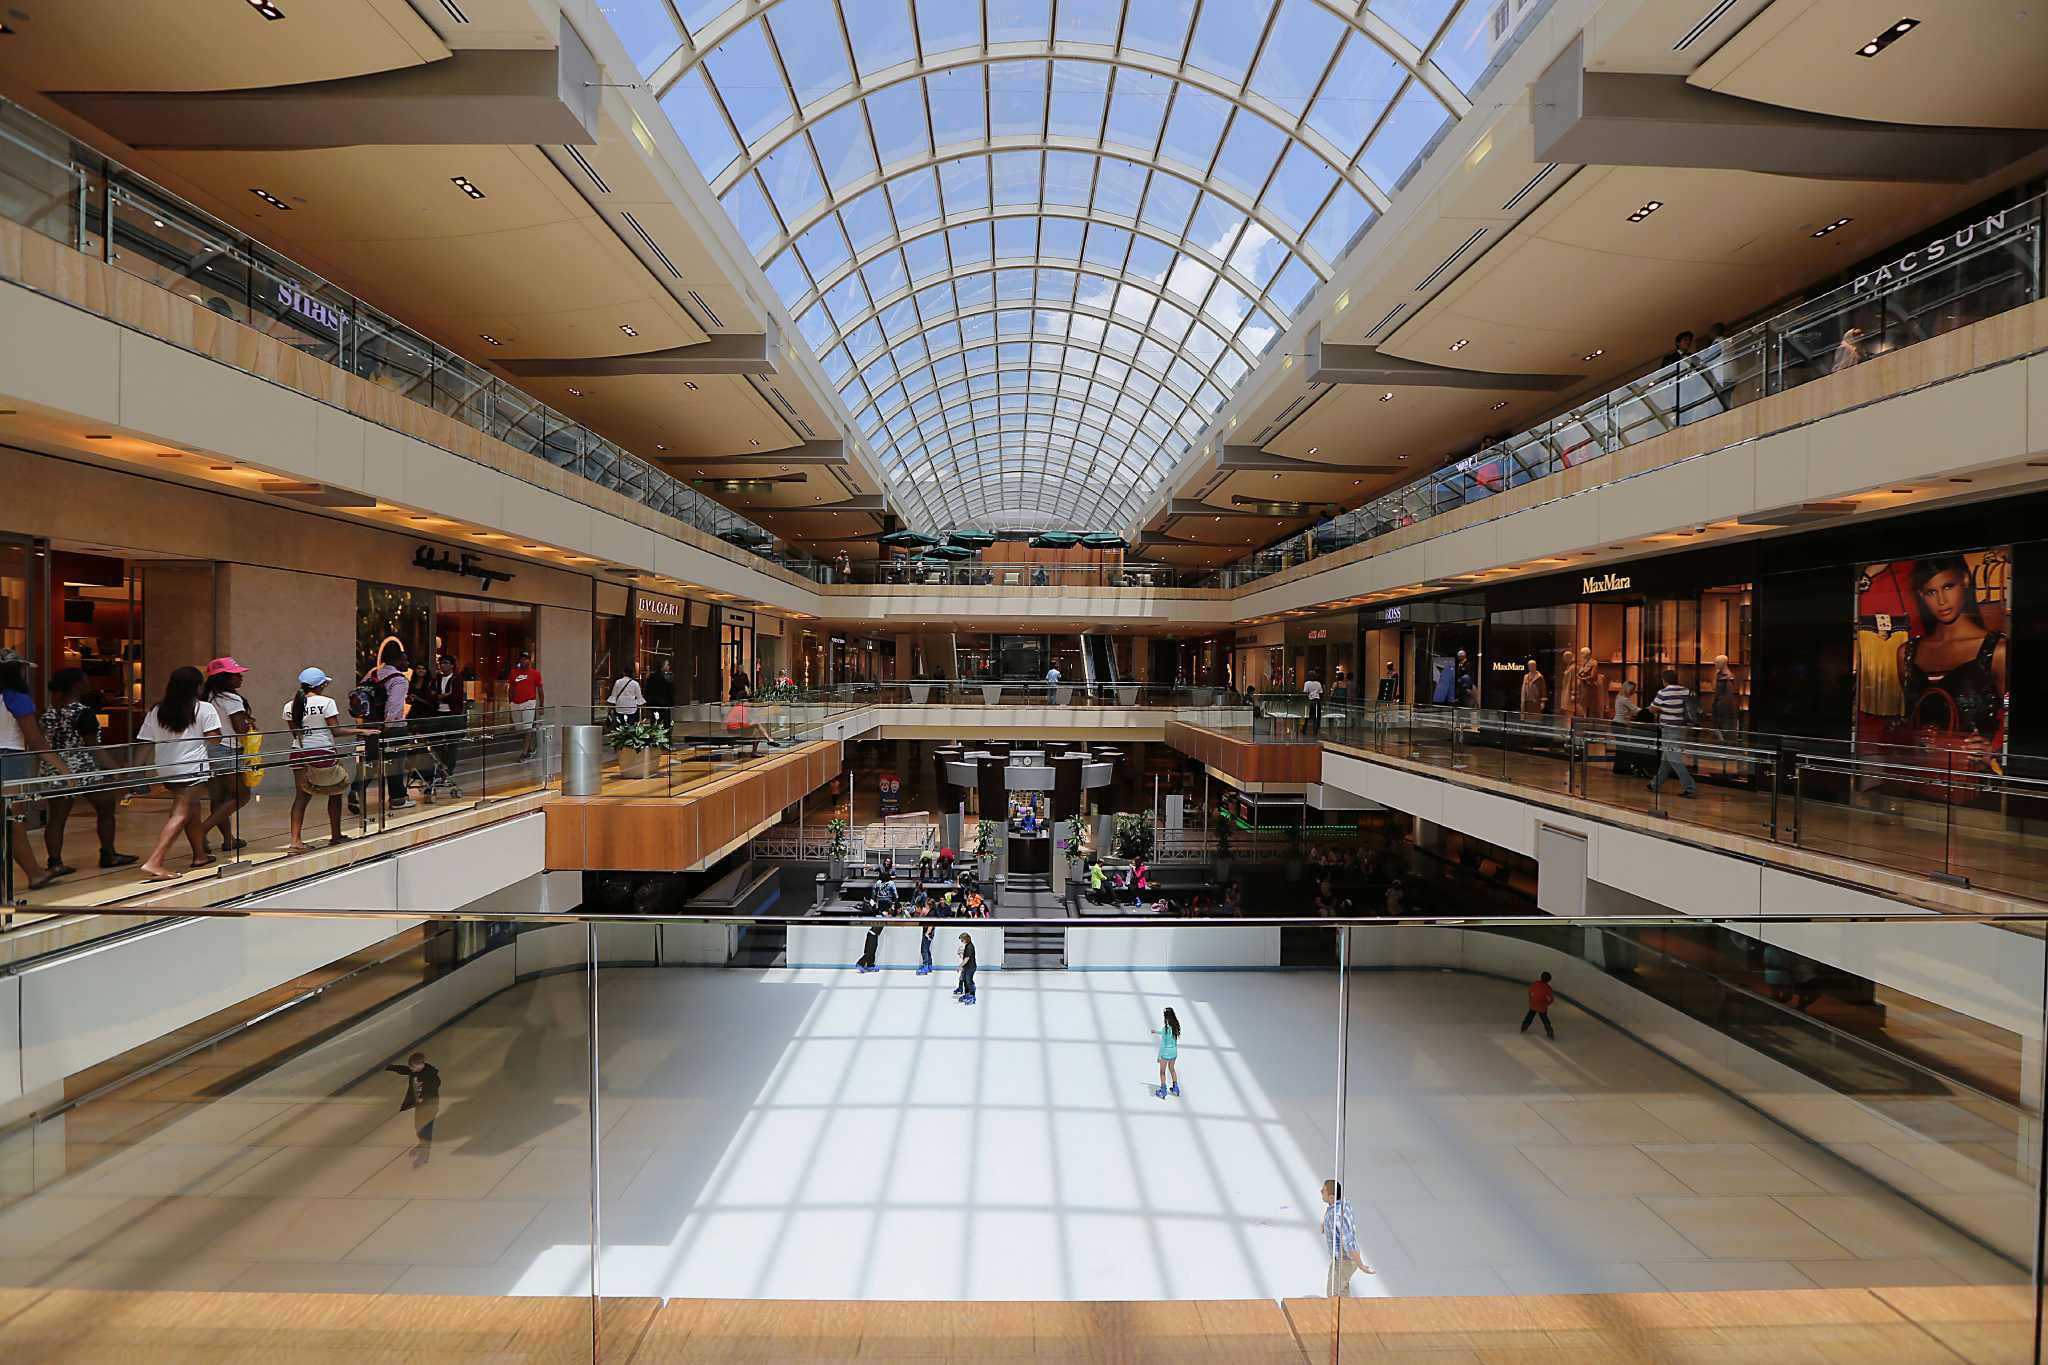 Galleria adds four new stores, including a big return by Dallas